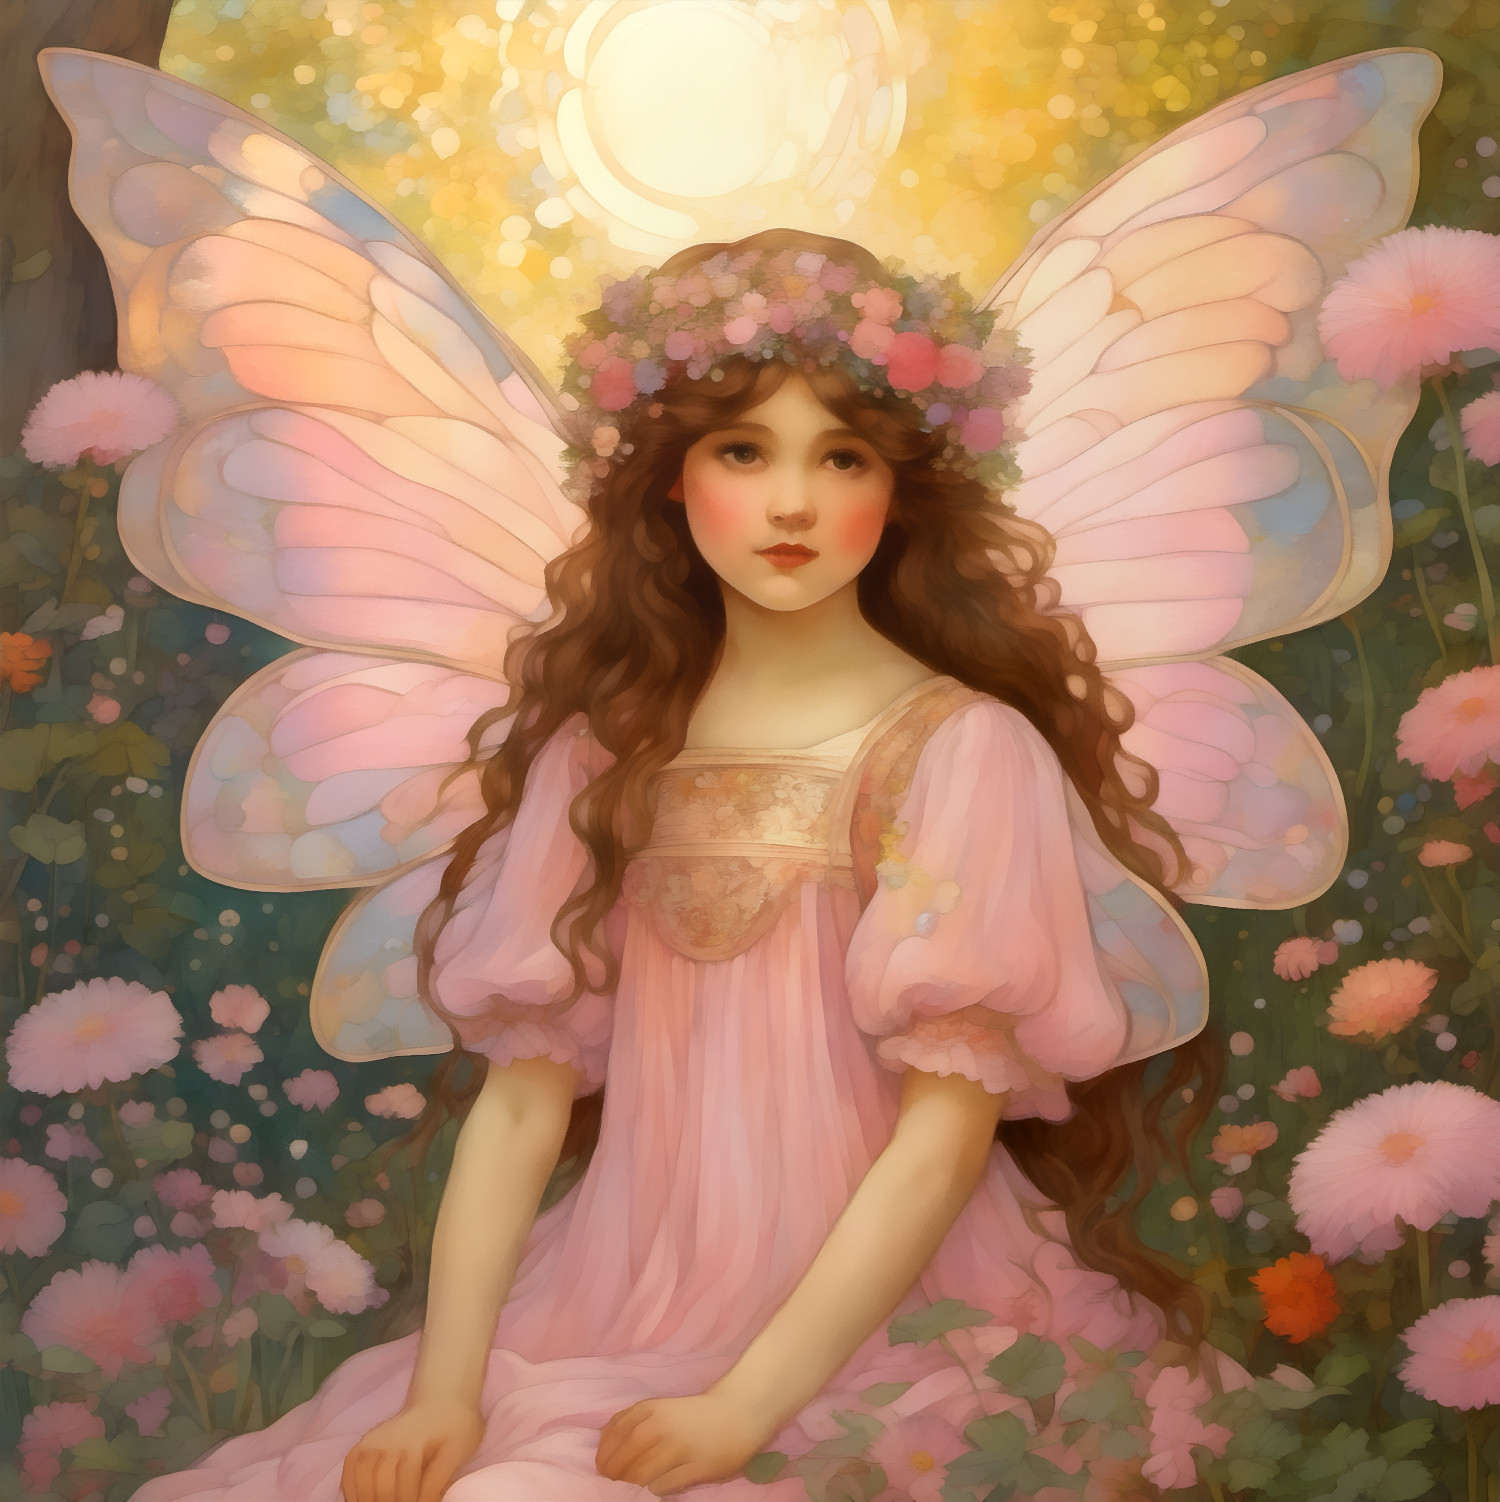 ADORABLE PINK FANTASY FAIRY PORTRAIT This fantasy fairy is pretty in pink! 🌸✨